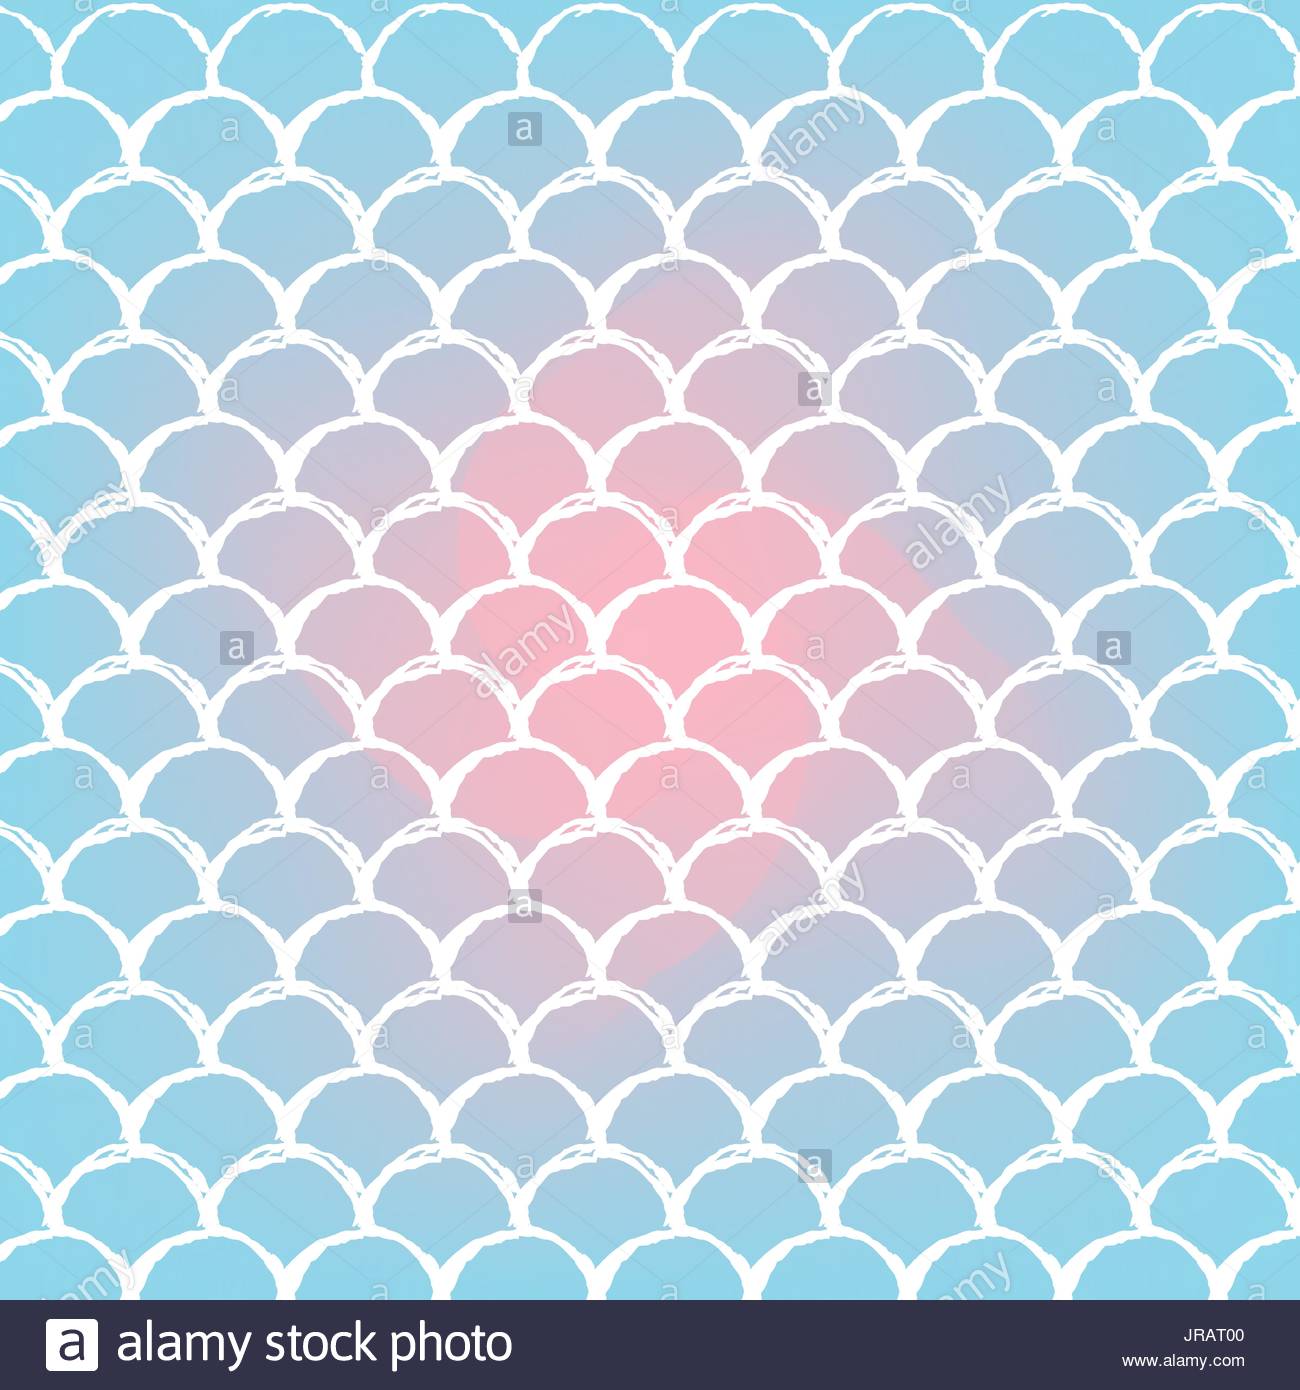 Fish Scale And Mermaid Background Stock Vector Art Illustration